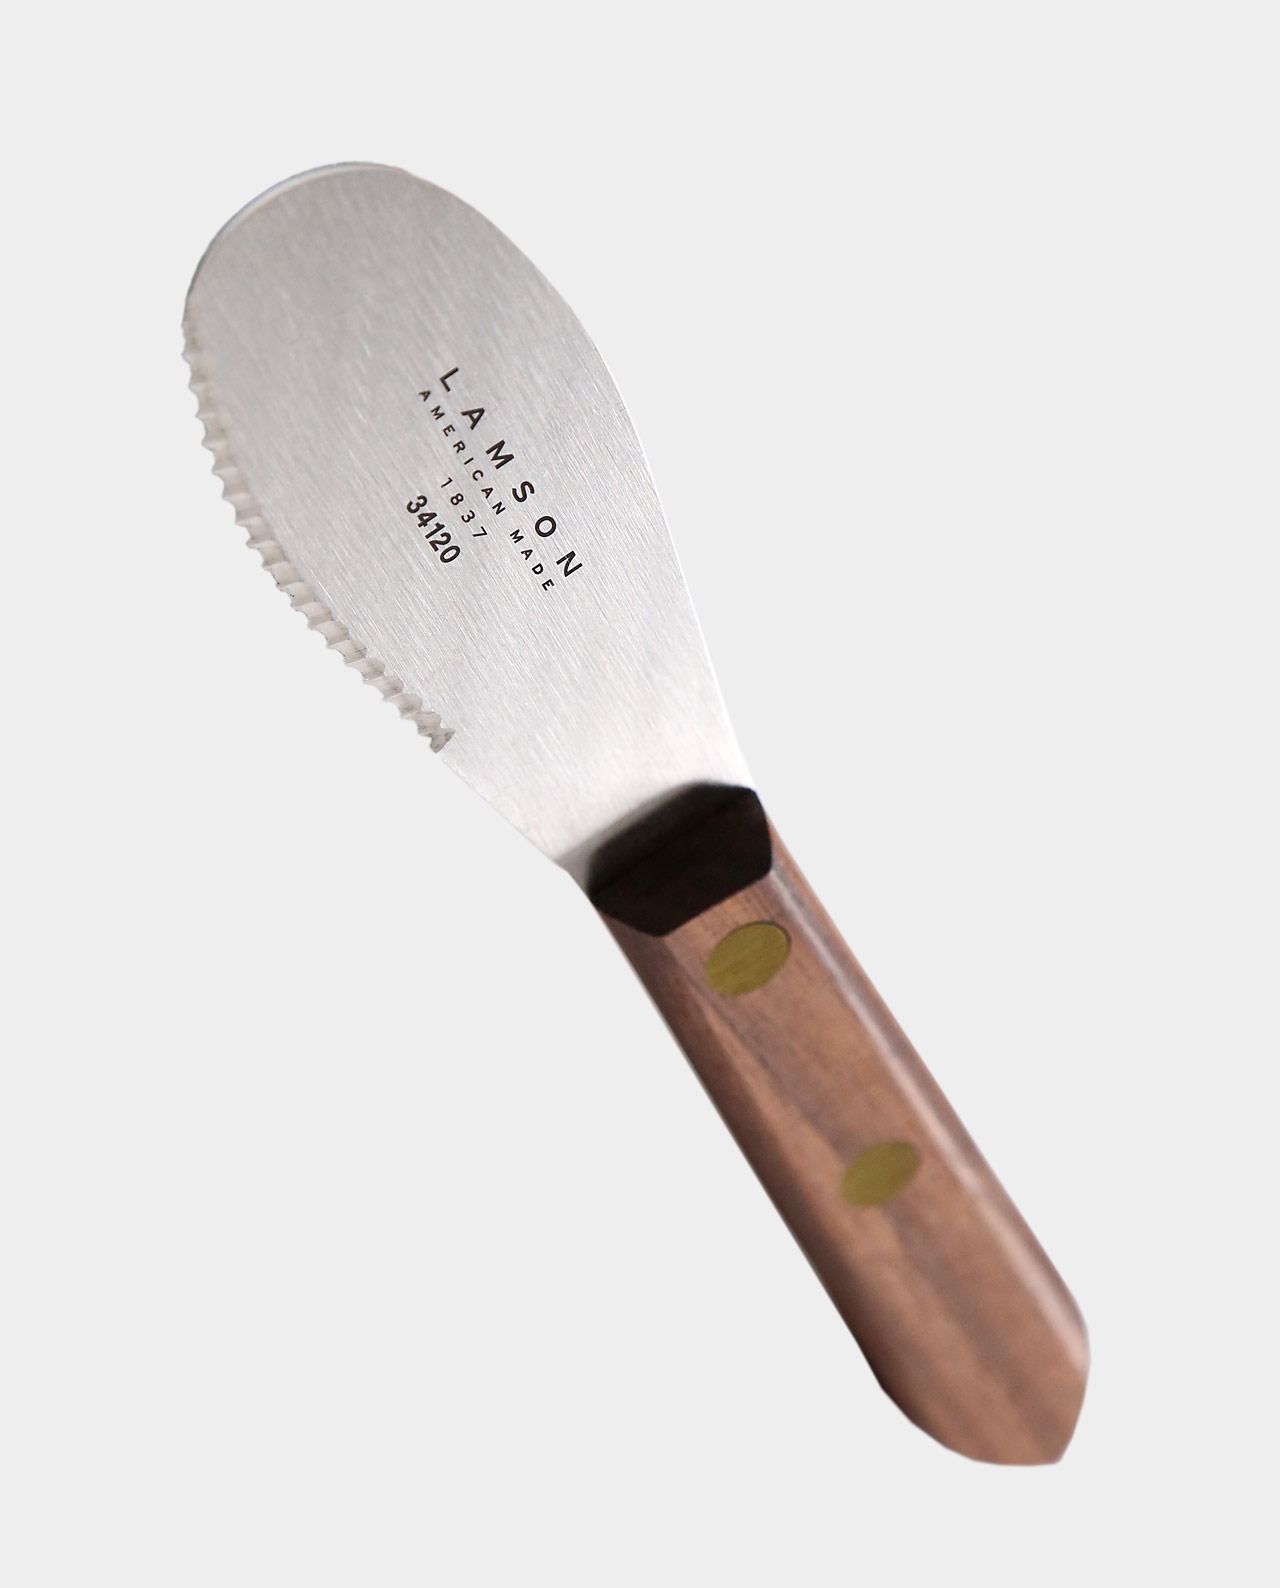 Breadtopia’s Choice — Offset Bread Knife